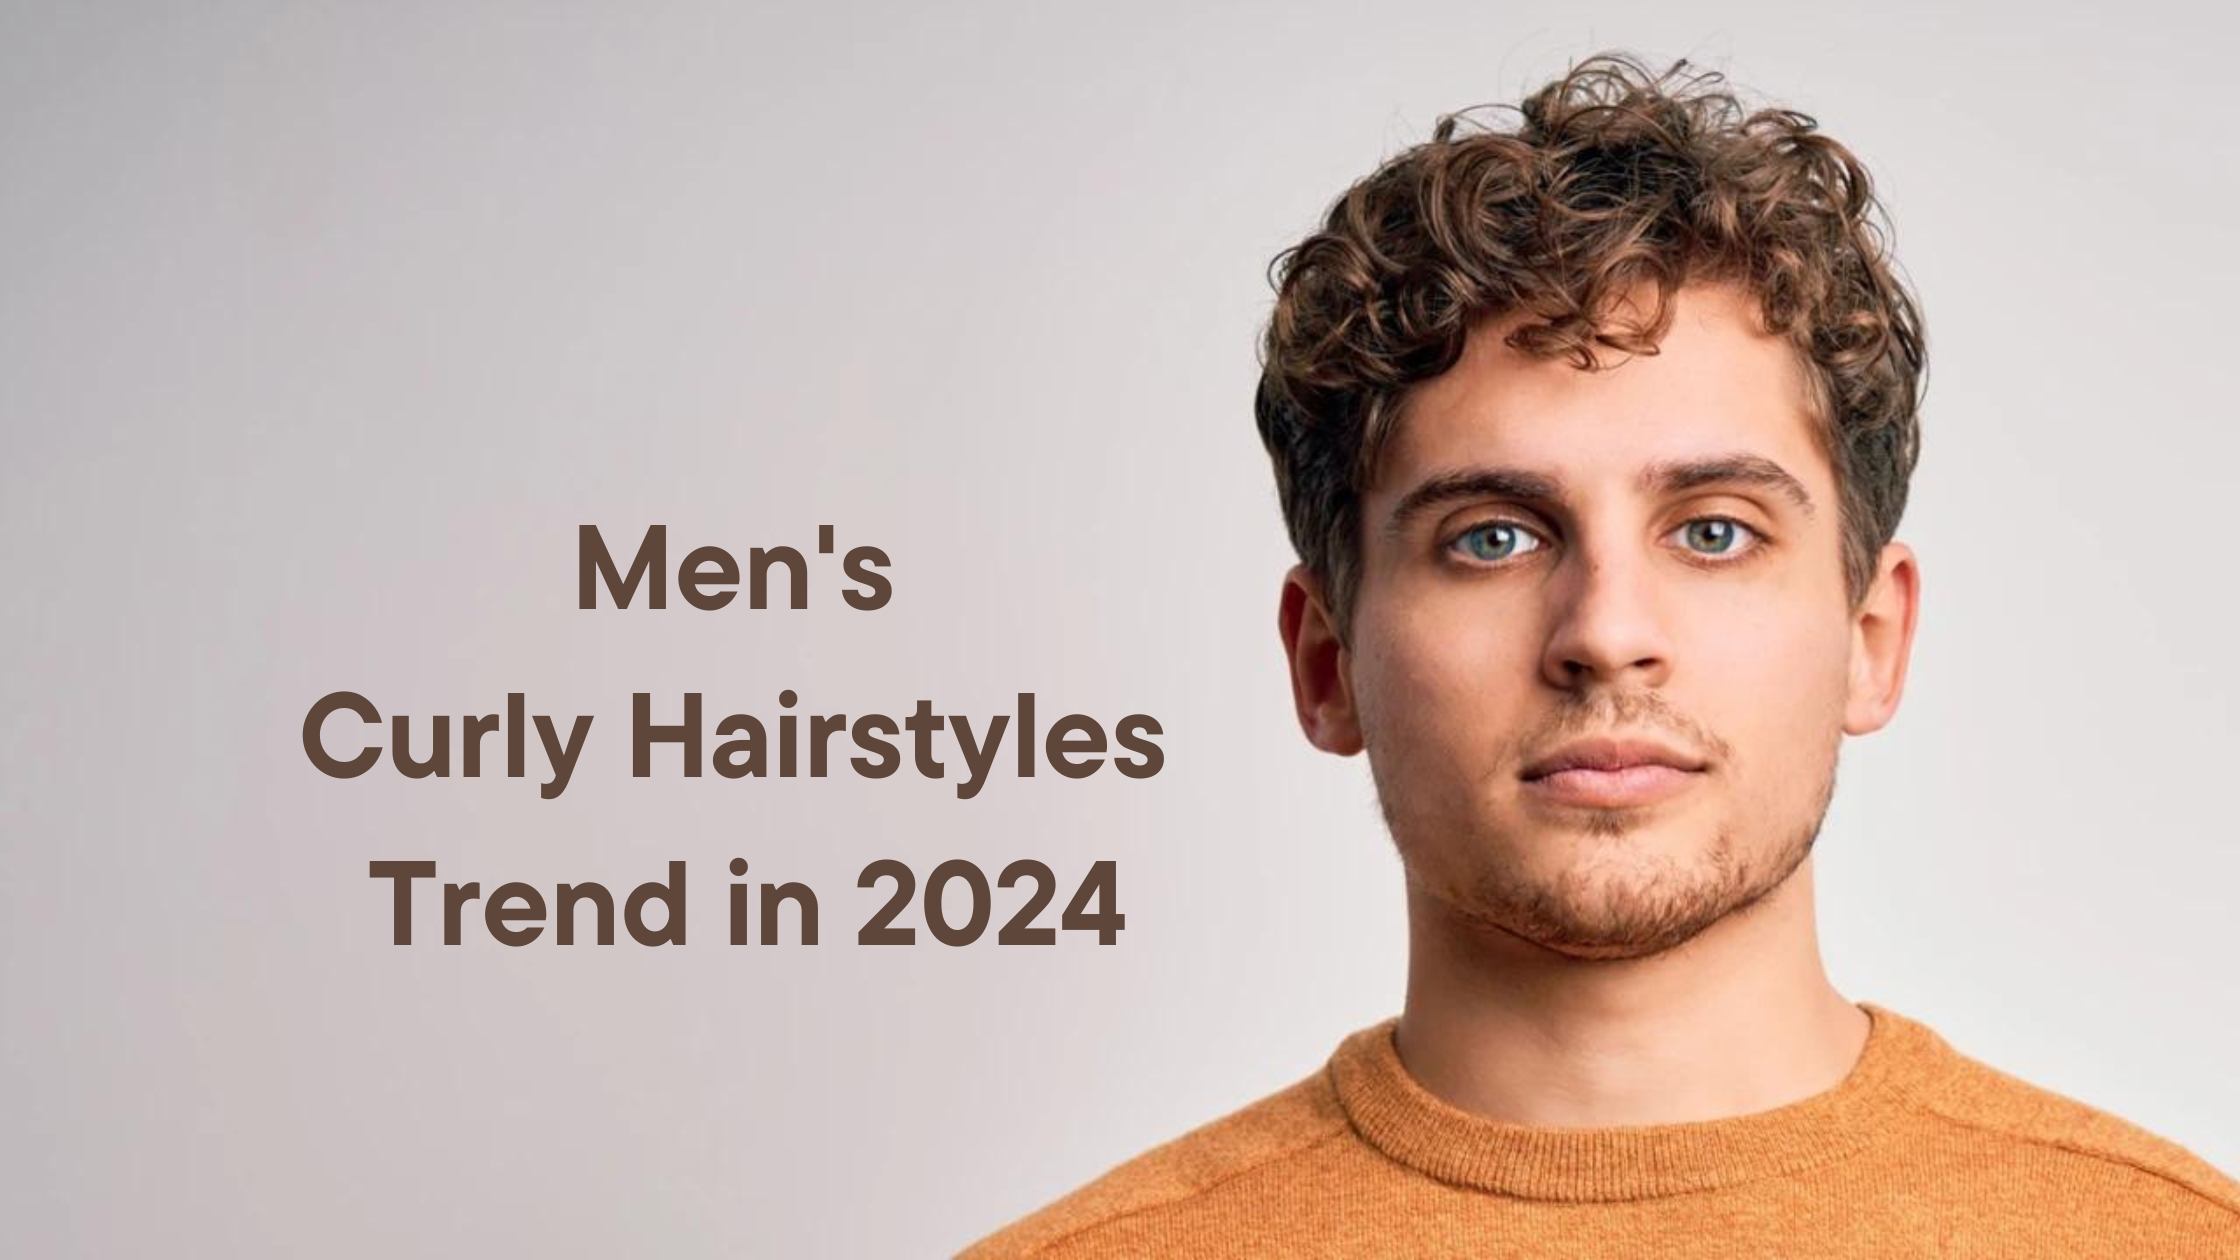 5 Top Tips For Men With Curly Hair